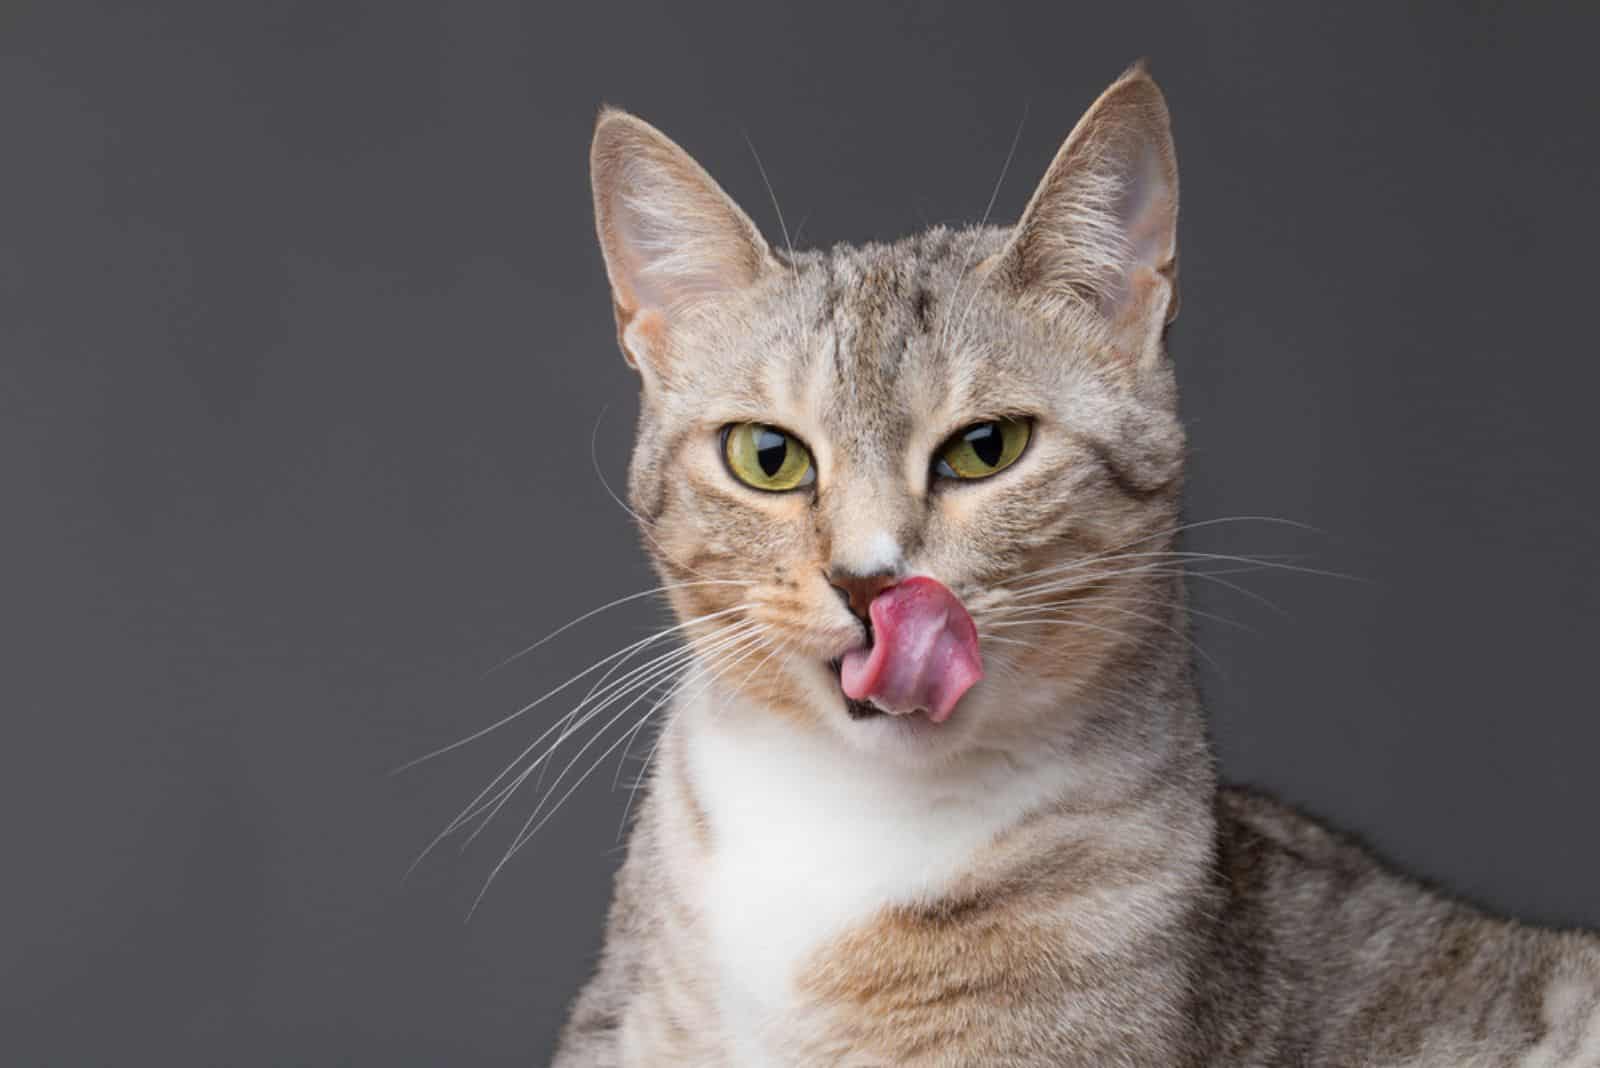 Cat smacking her lips tongue out